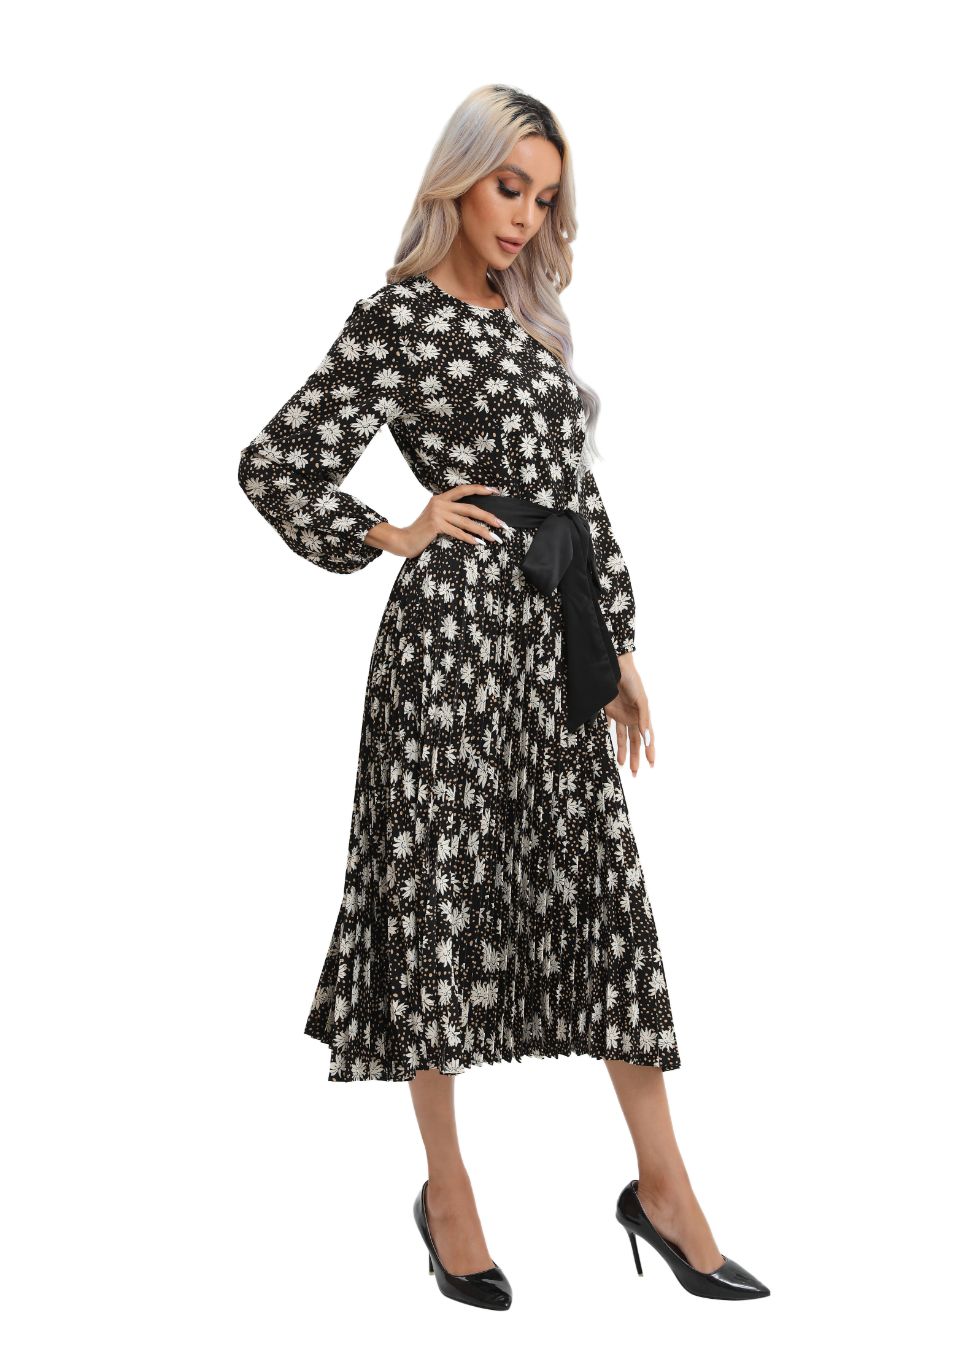 Modest Floral Midi Dress with Front Tie - seilerlanguageservices